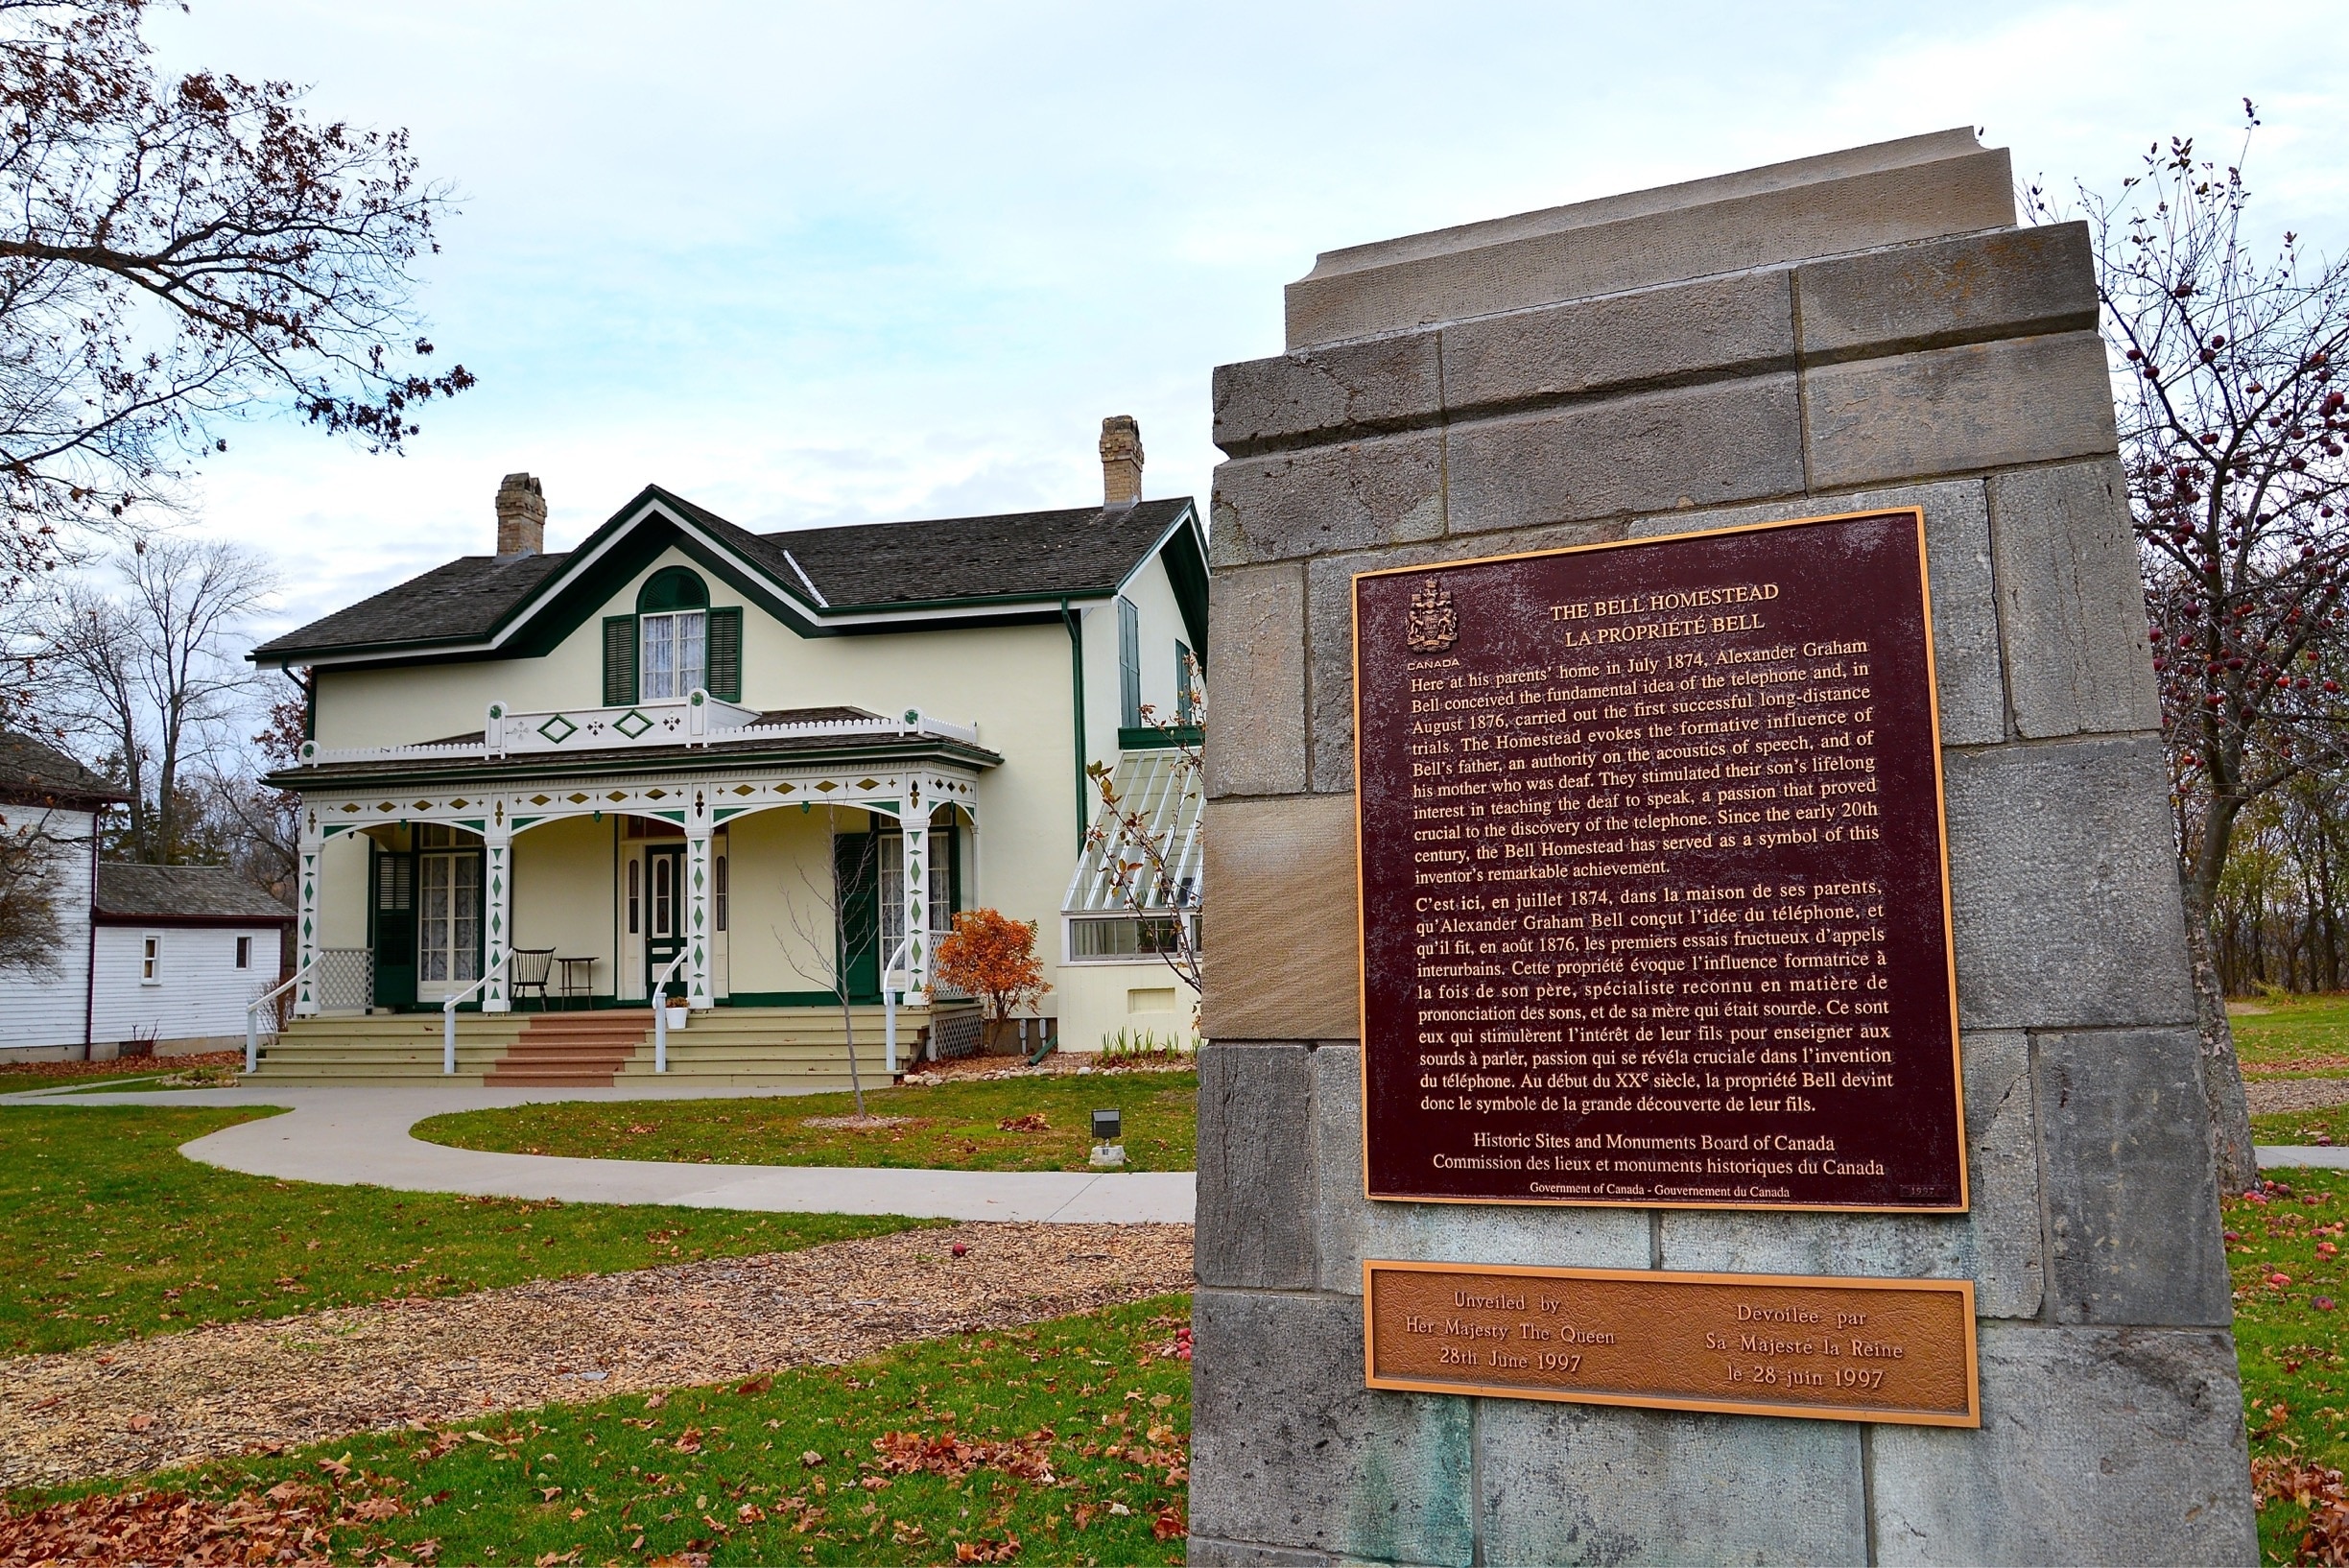 National Historic Sites of Canada: Bell Homestead - The Birthplace of Telephone
The home of Alexander Graham Bell, the teacher of the deaf who invented the telephone. This is the site where he breathed the life into his ideas for a "speaking telephone" in 1874.
#architecture #History Photo Contest #Canada #Brantford